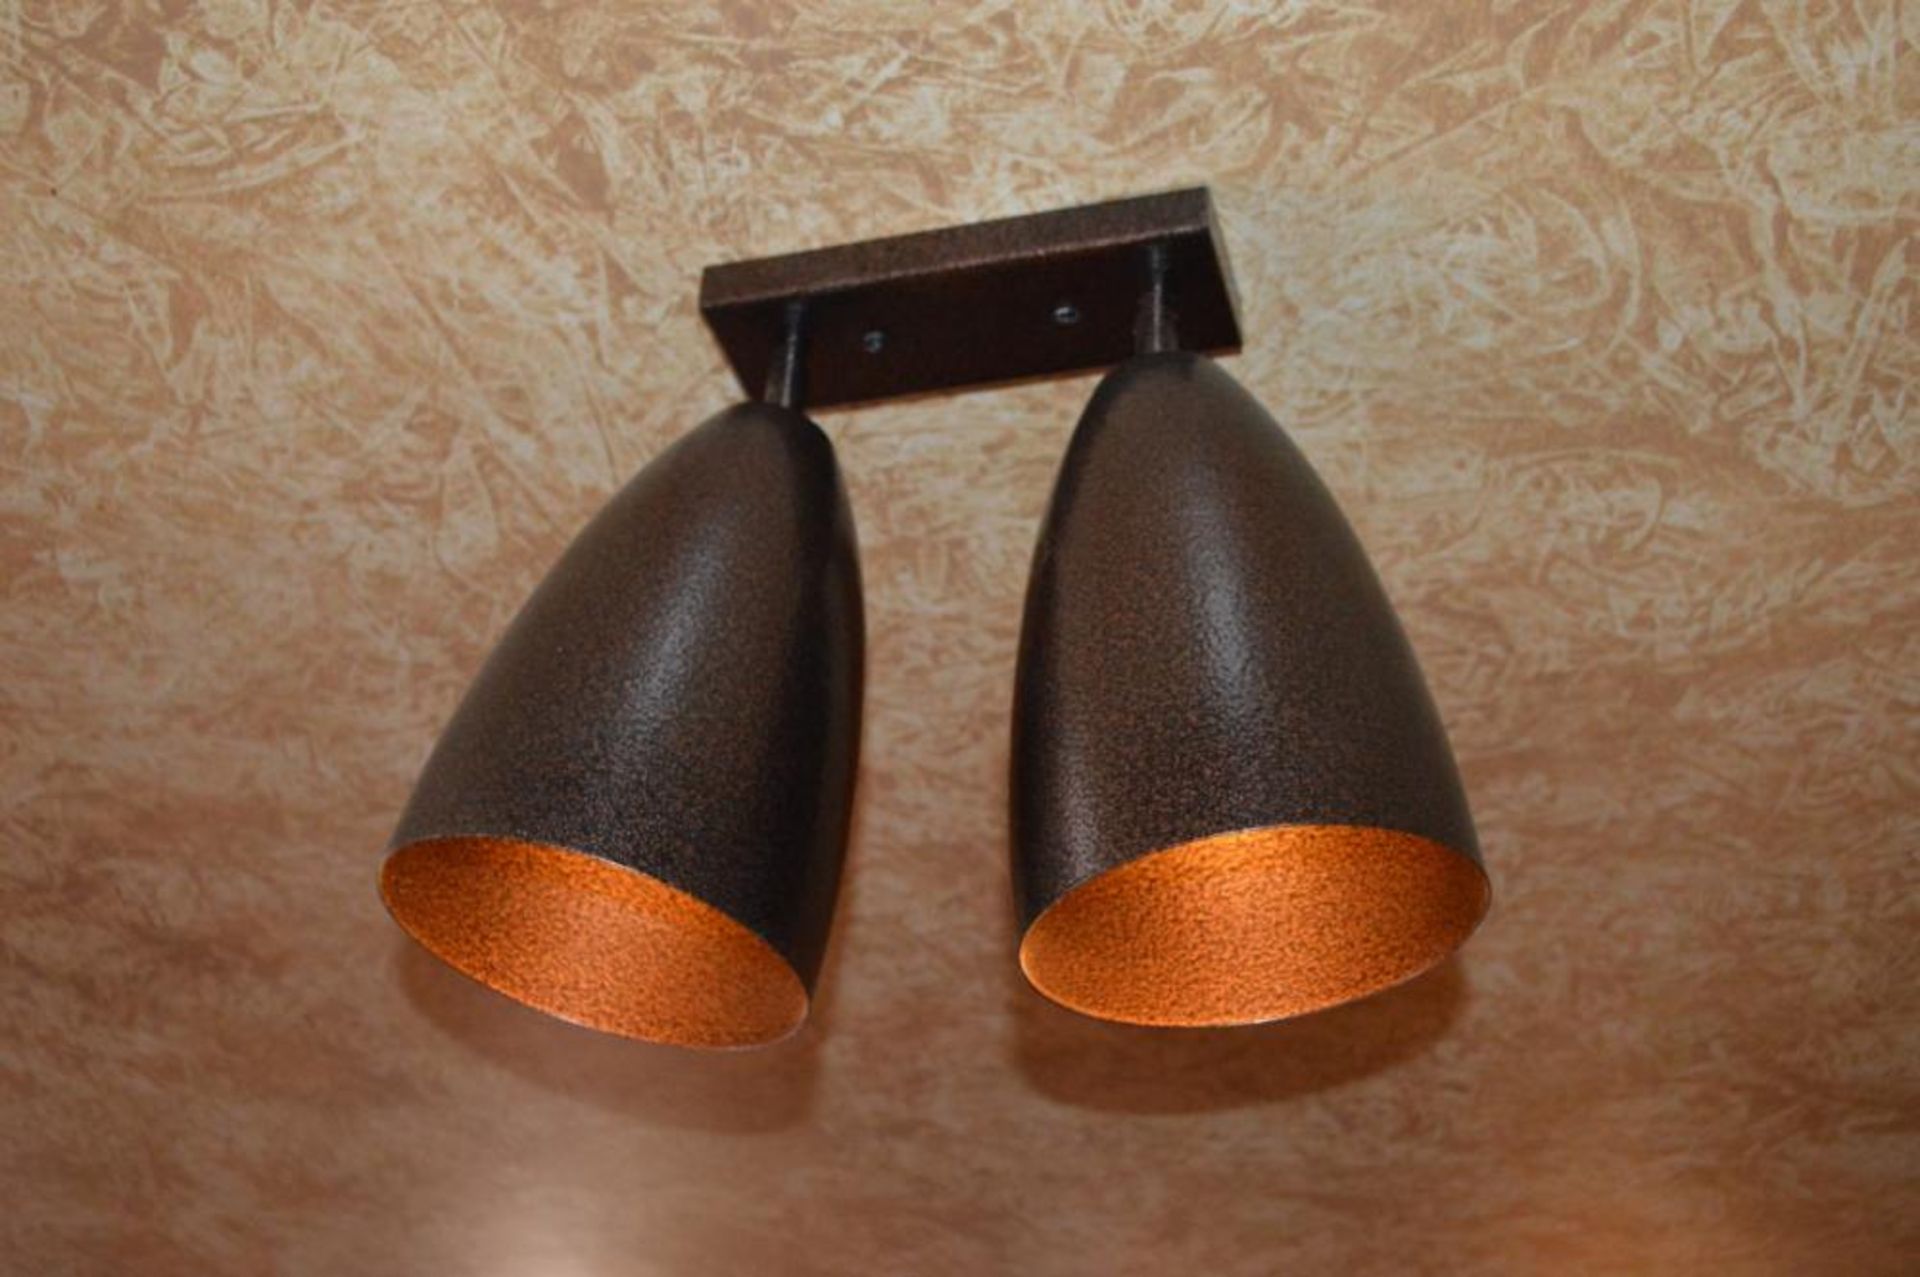 5 x Adjustable Double Halogen Light Fittings With Brown Pitted Finish - GZ10/GU10 50w Max - 35 x 45 - Image 2 of 3